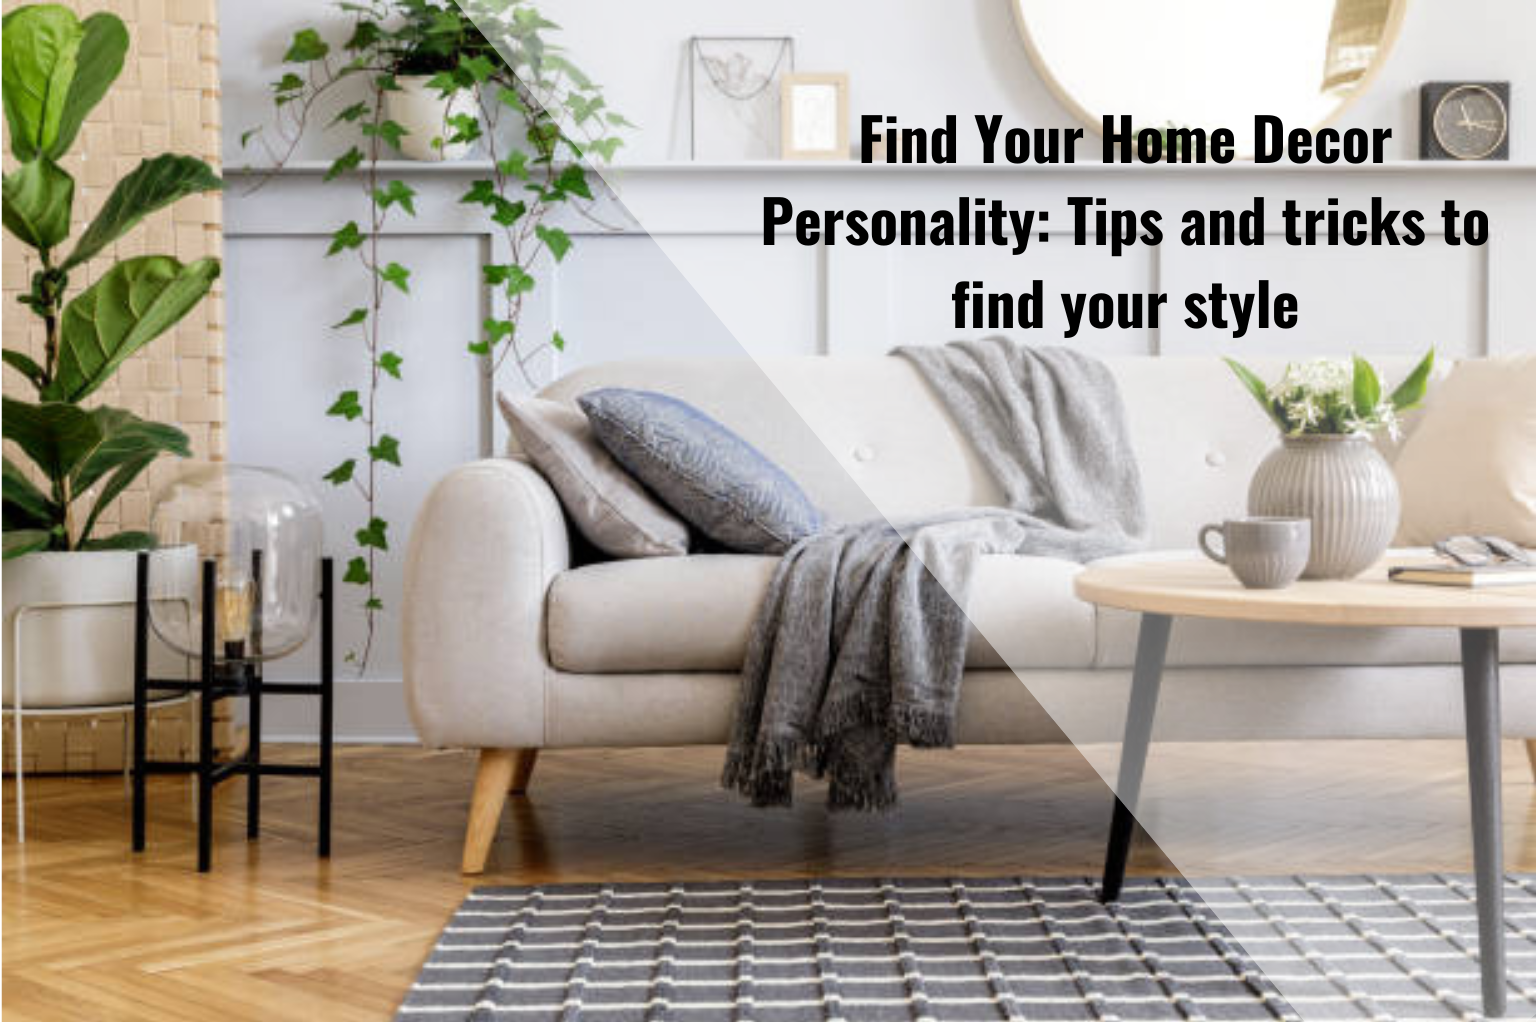 Find Your Home Decor Personality: Tips and tricks to find your style